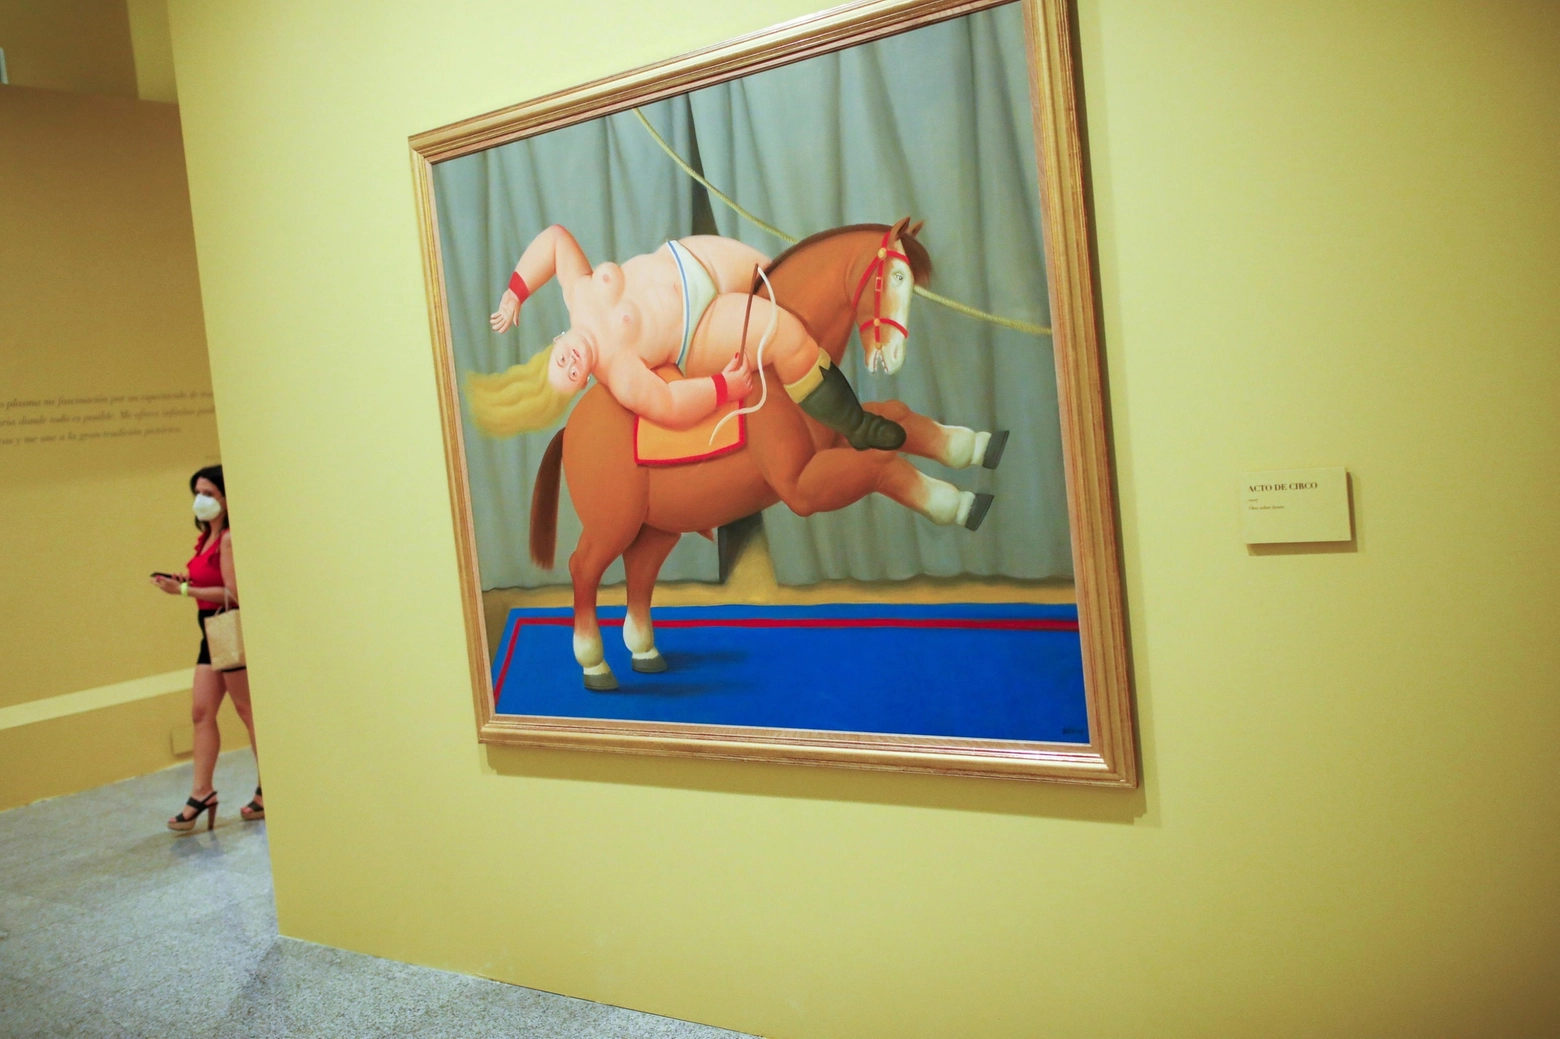 epa08672592 A visitor passes next to the painting 'Acto de Circo' (Lit: Circus Act) by Colombian artist Fernando Botero during the press preview of the Exhibition 'Botero: 60 Years of Painting' at CentroCentro in Madrid, Spain, 16 September 2020. The show features 67 artworks by Botero and will run from 17 September 2020 to 07 February 2021.  EPA/David Fernandez